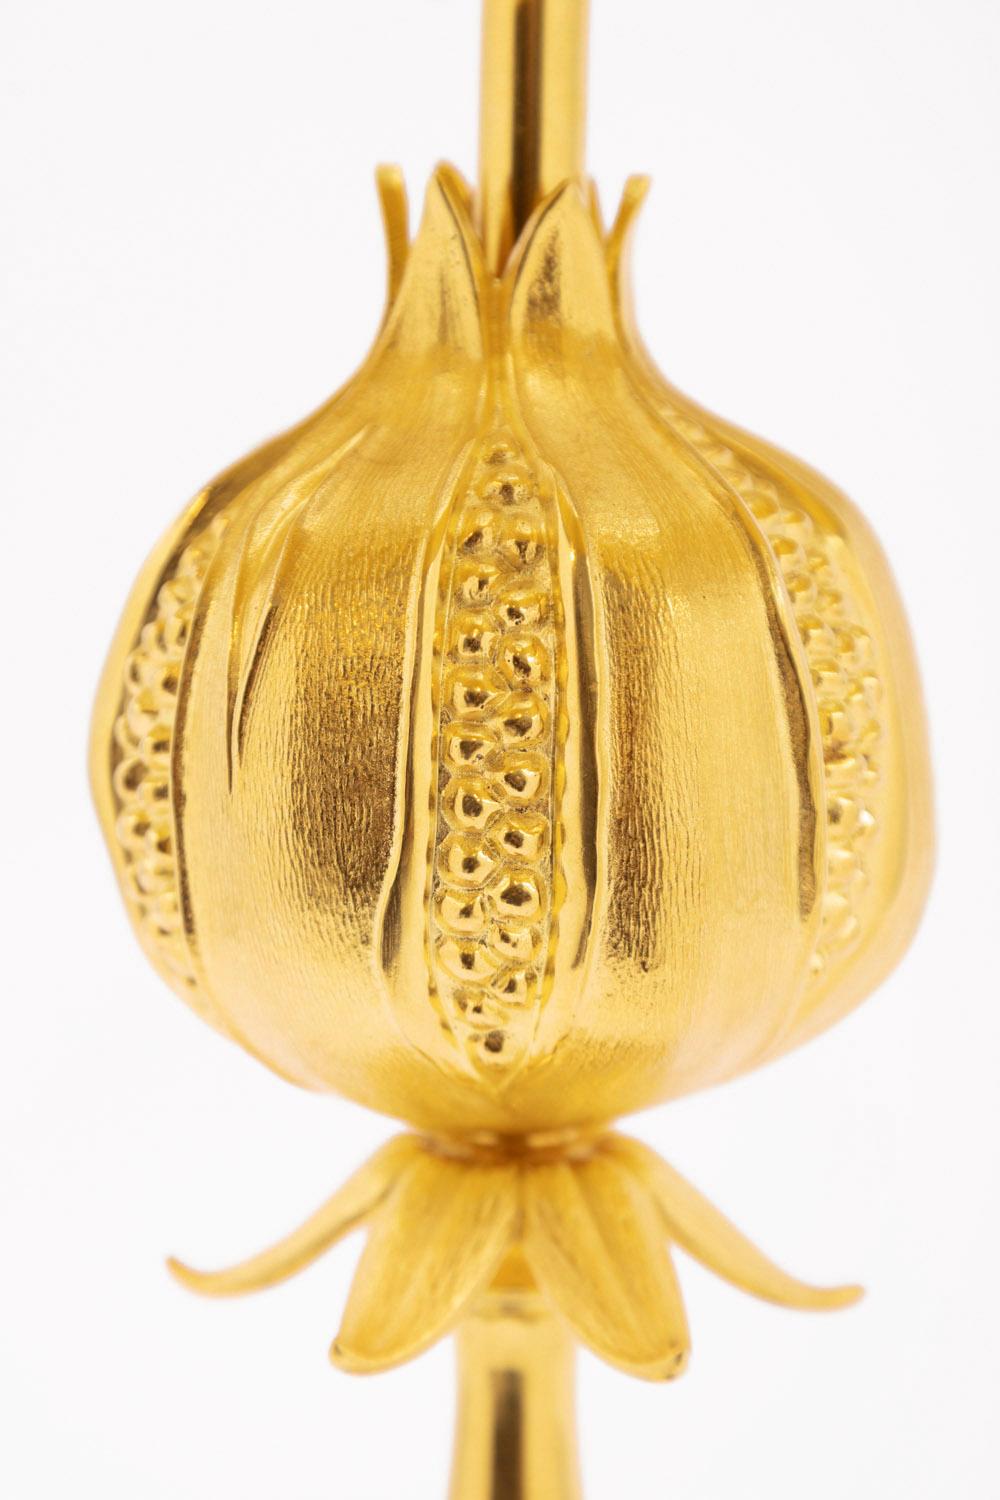 French Maison Charles, Lamp “Pomegranate” in Gilt Bronze, 1970s